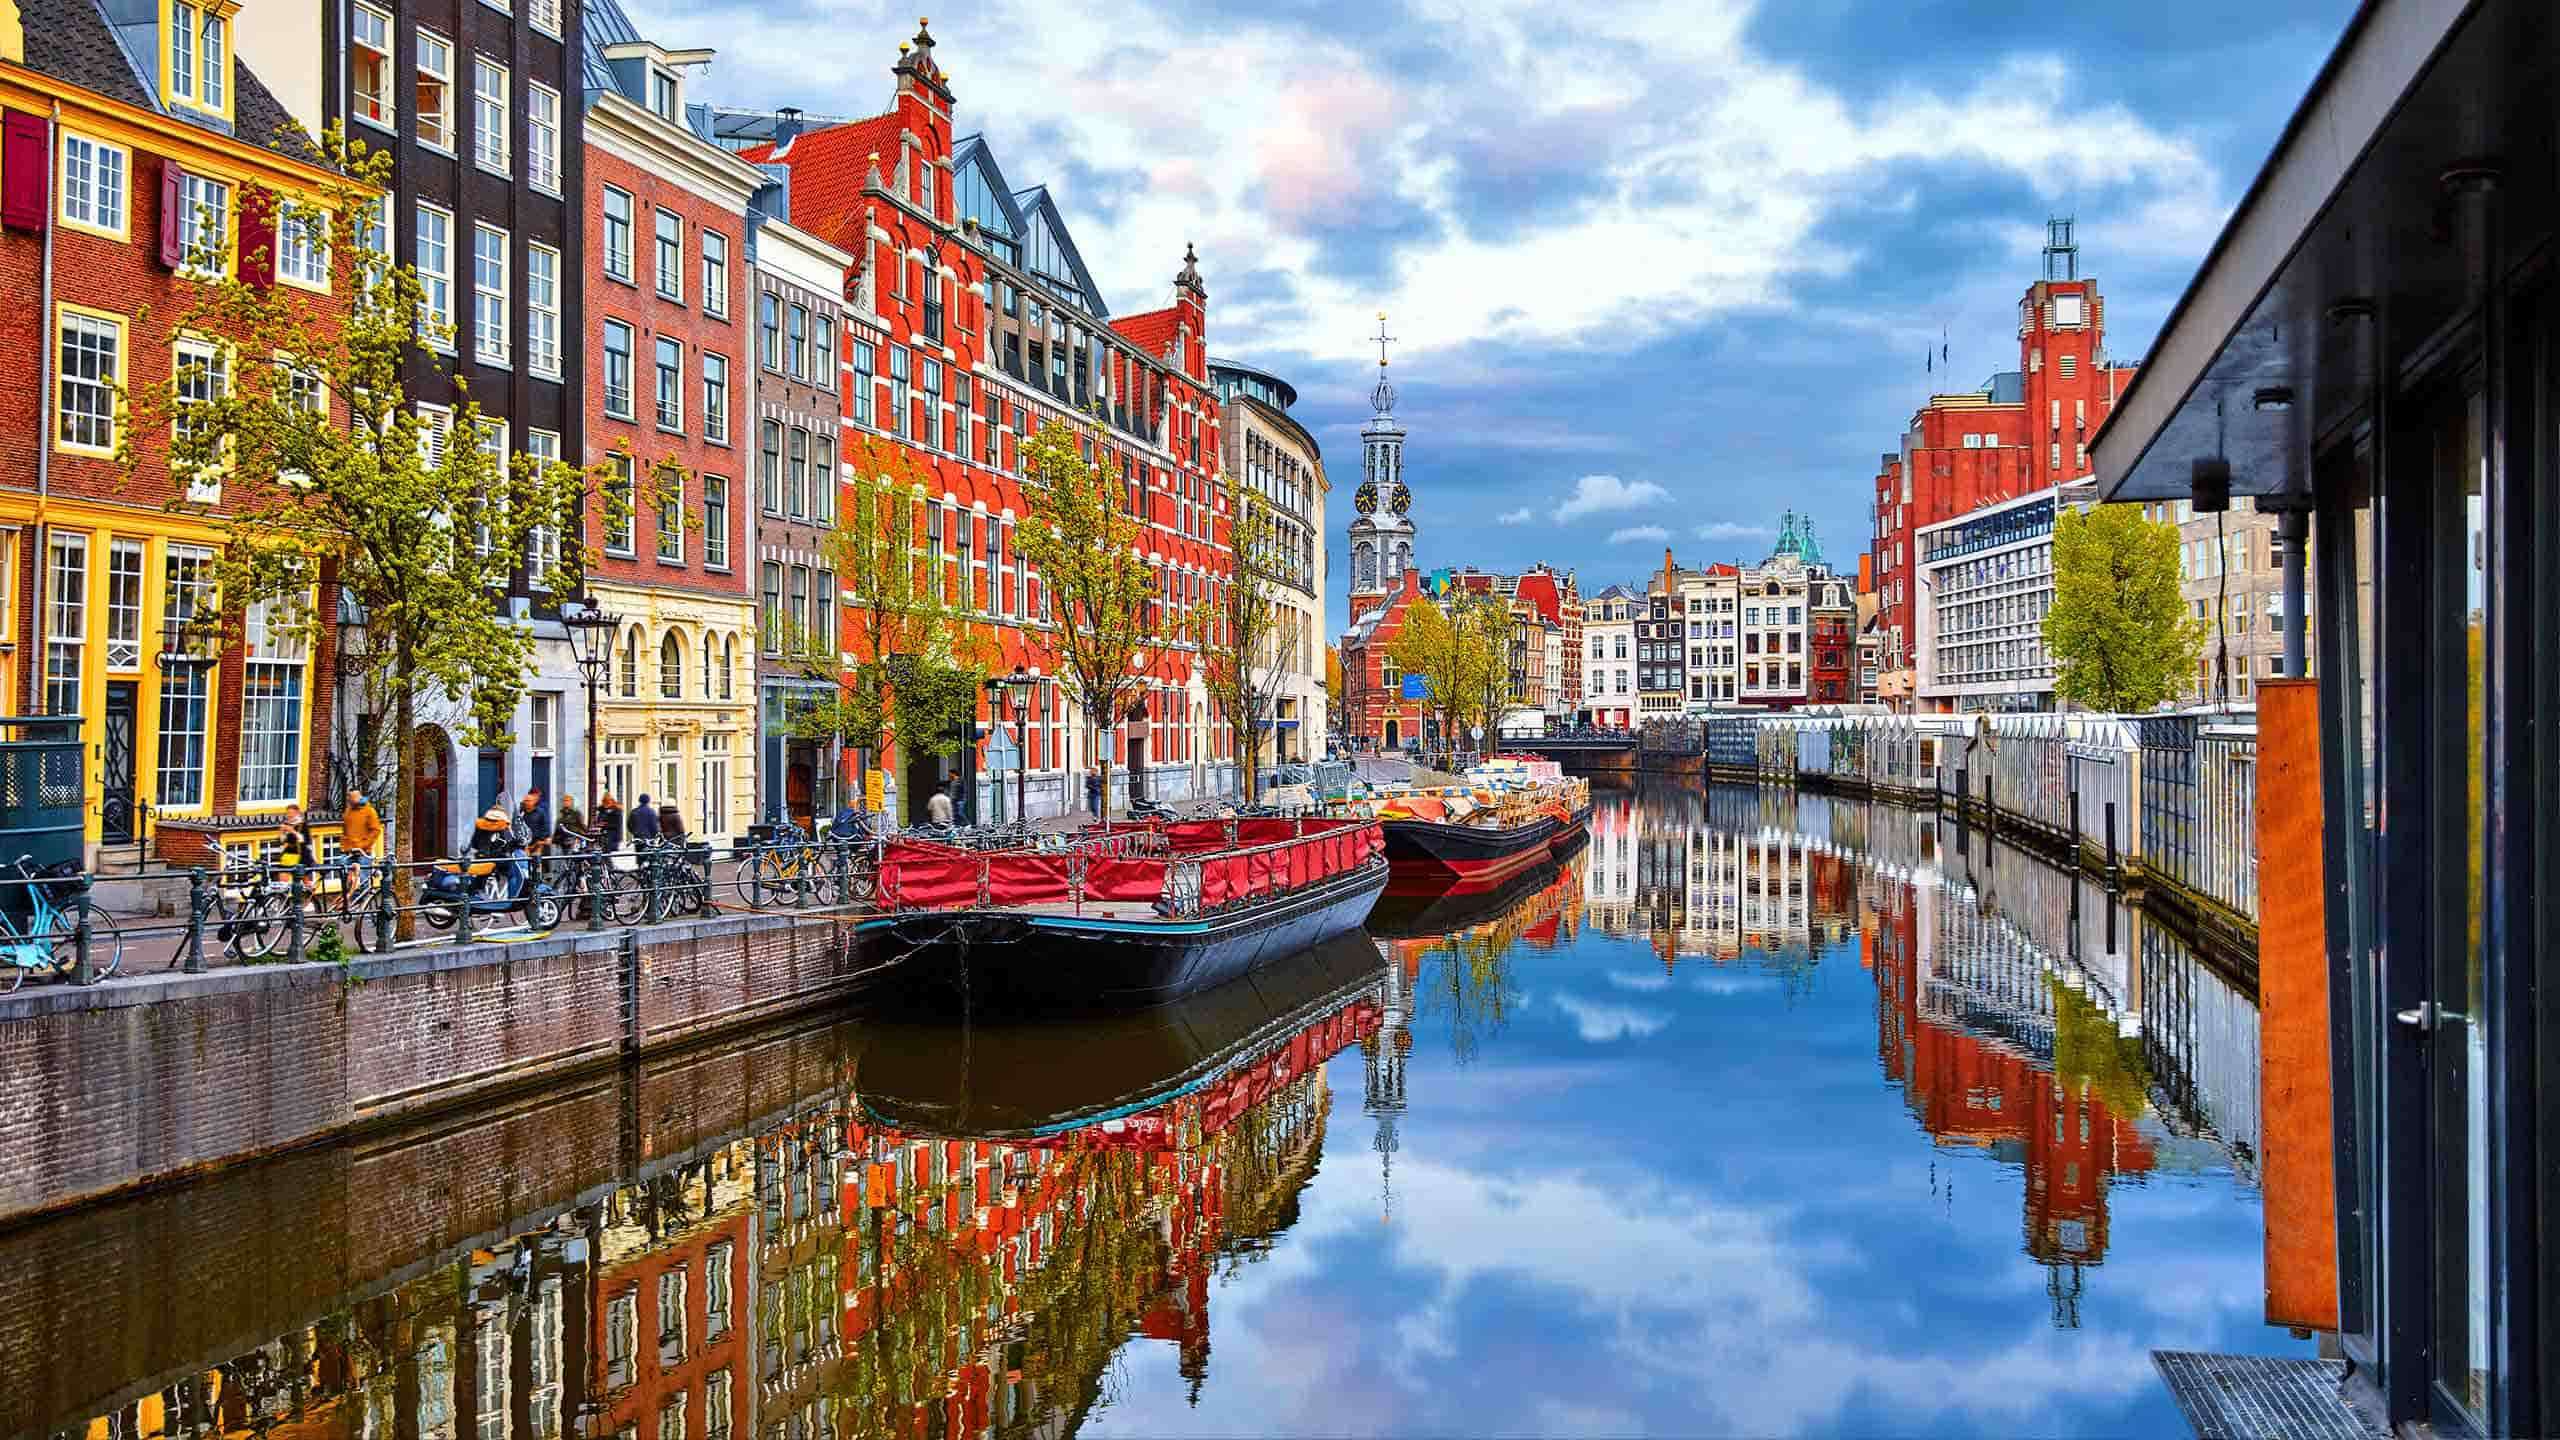 Active & Discovery Cruise In Holland & Belgium (Amsterdam To Amsterdam) 8D7N 